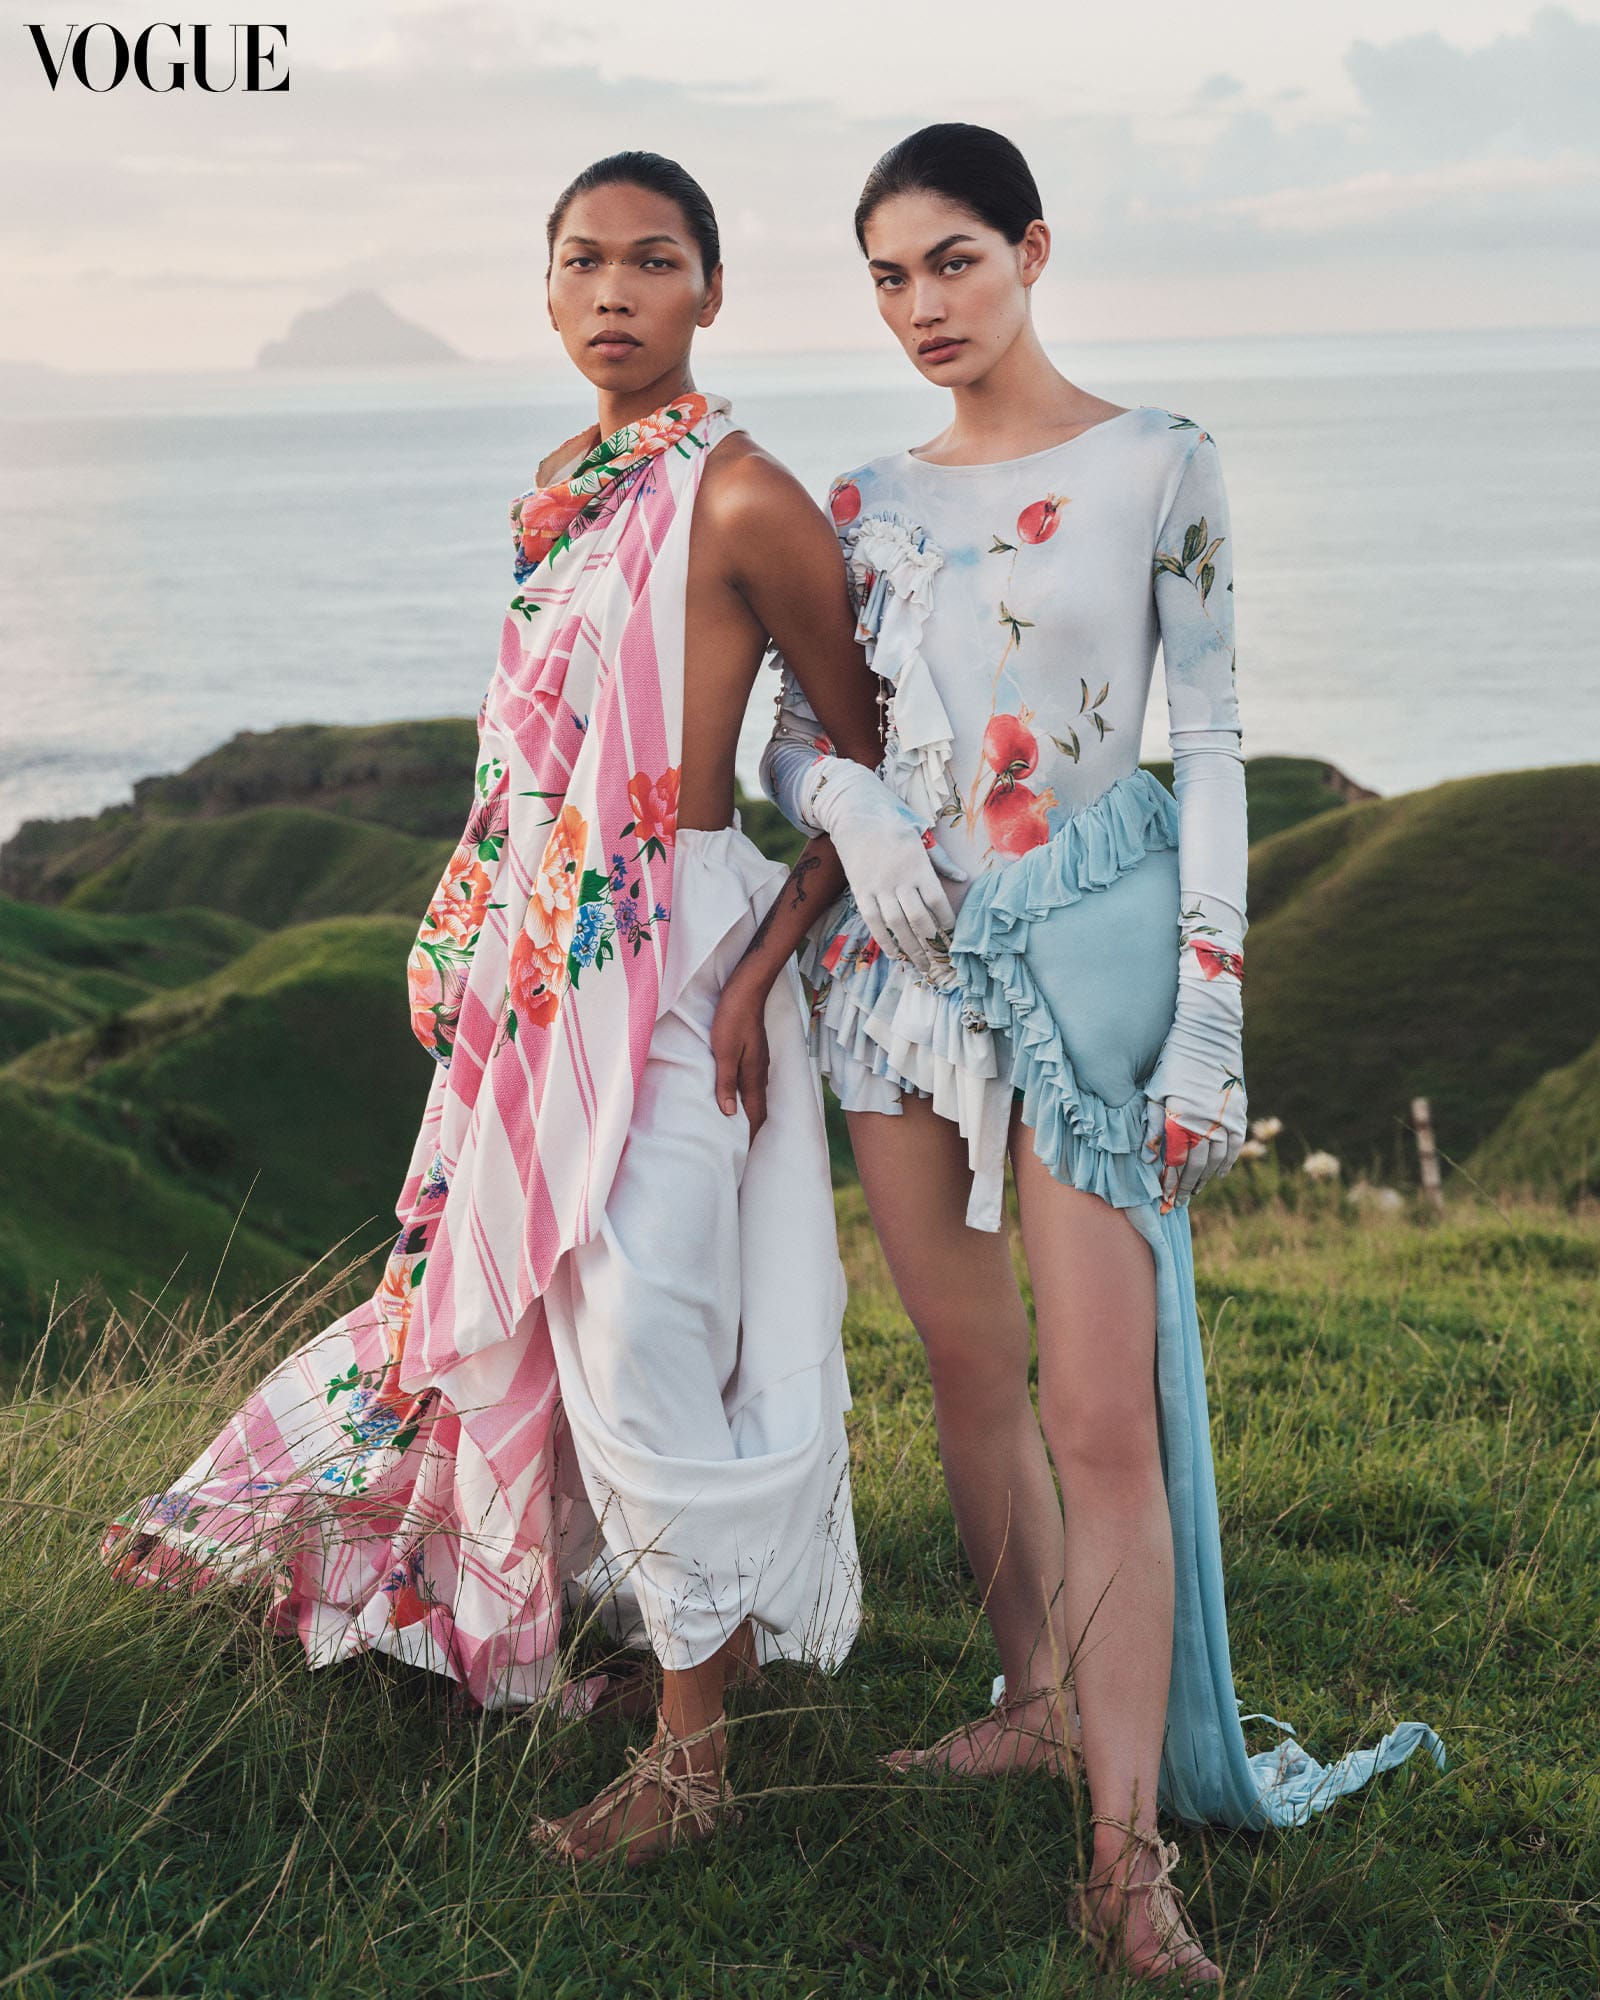 Rina wears a ZIXUAN LIU Bedding-Inspired Dress, a fusion of playful ruffles, layered textures, and a vintage fruit print. Lukresia wears a JUDE MACASINAG knotted wrap skirt made of Sparrow kumot worn as a top and a crepe free-draped skirt. Both wear Ivatan Tukap rope sandals.